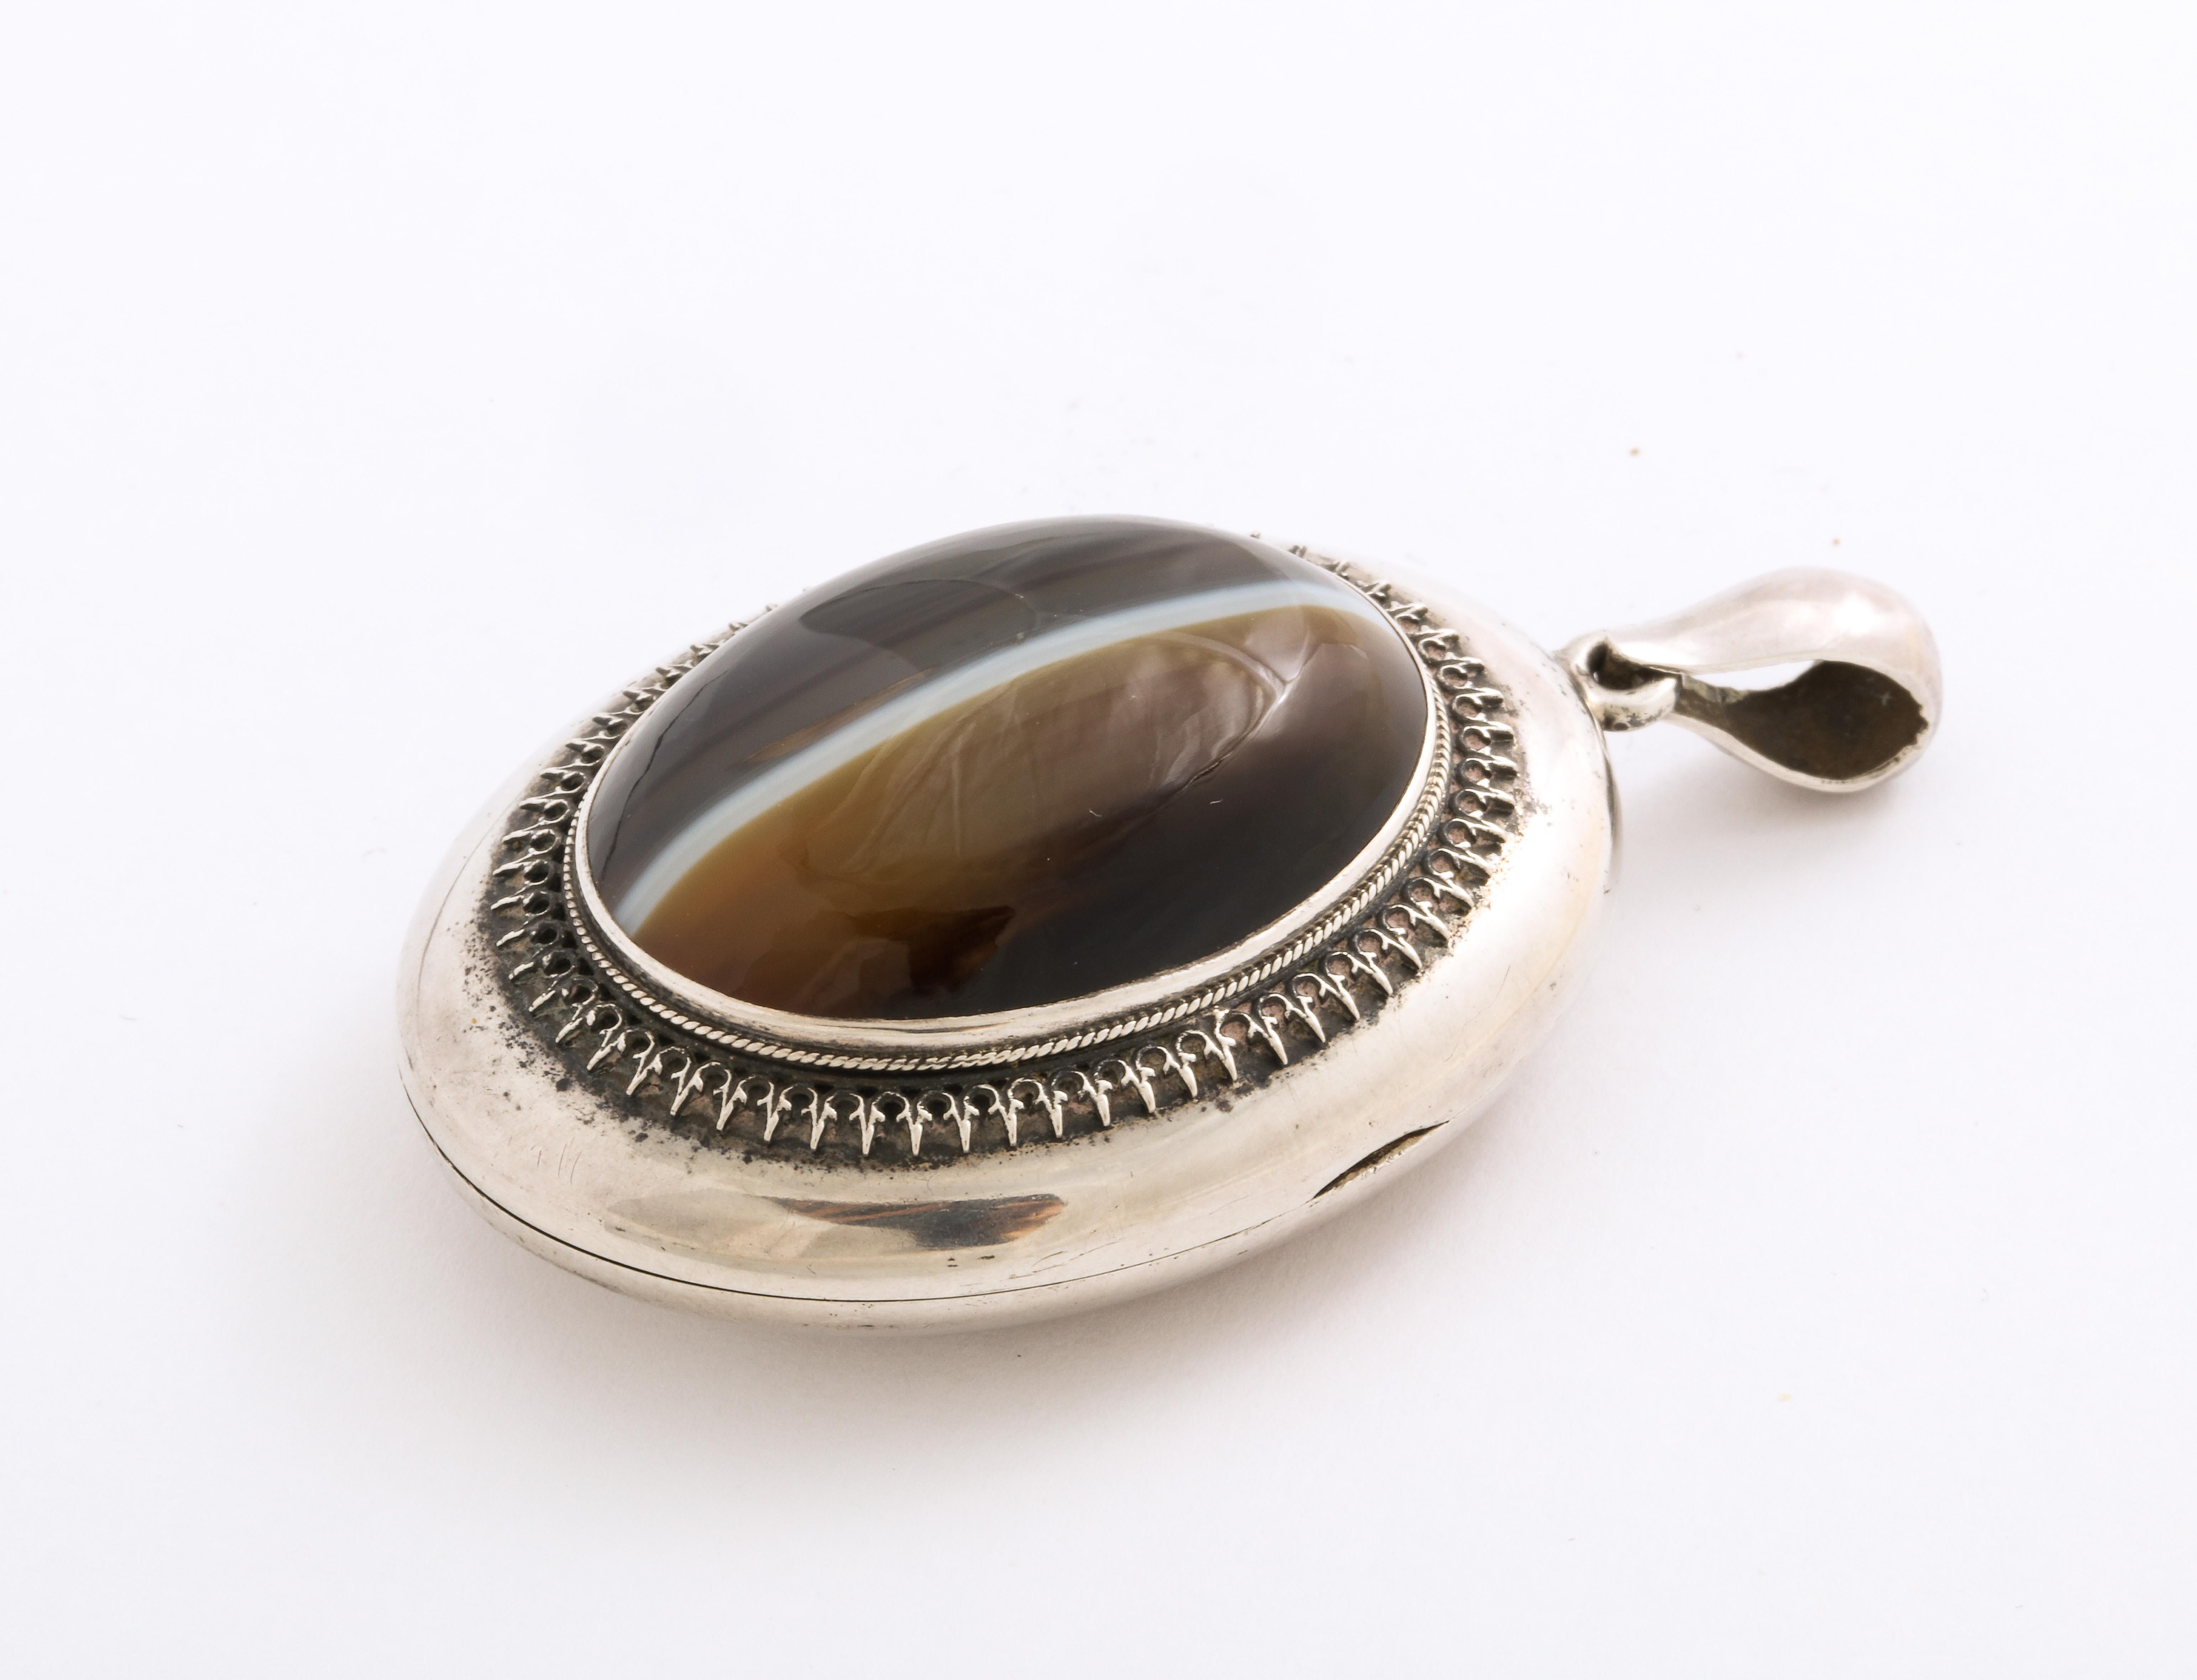 An unusual combination Scottish locket leans toward the bold side. There was a silver revolution in England between 1860-1880 when Queen Victorian gifted silver and wore it herself after years and years of donning only black in mourning for her